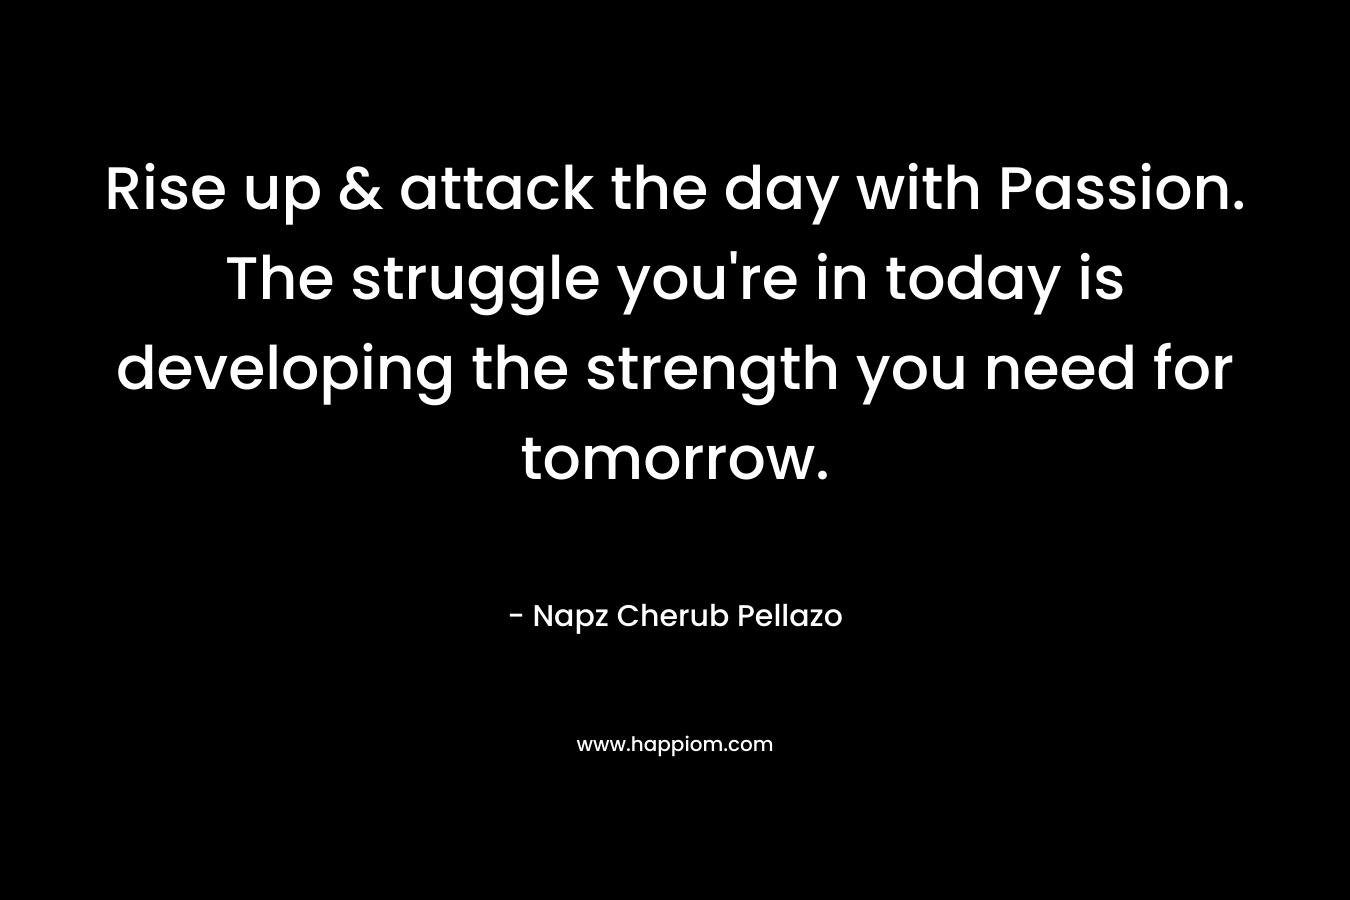 Rise up & attack the day with Passion. The struggle you're in today is developing the strength you need for tomorrow.